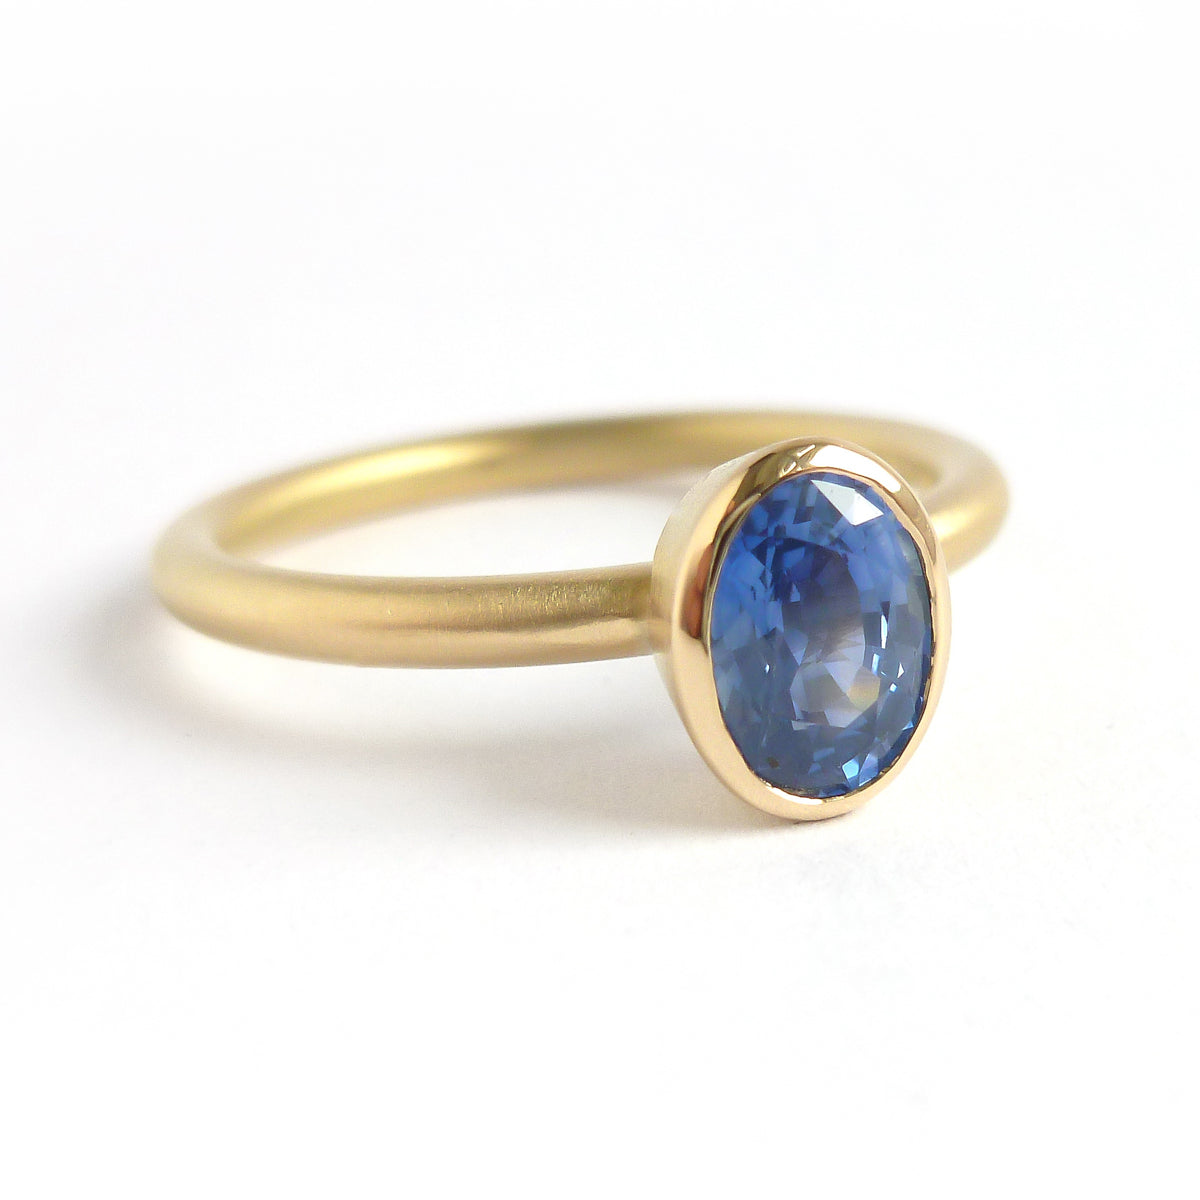 Contemporary, modern, bespoke, unique and handmade 18ct Gold Rings ...